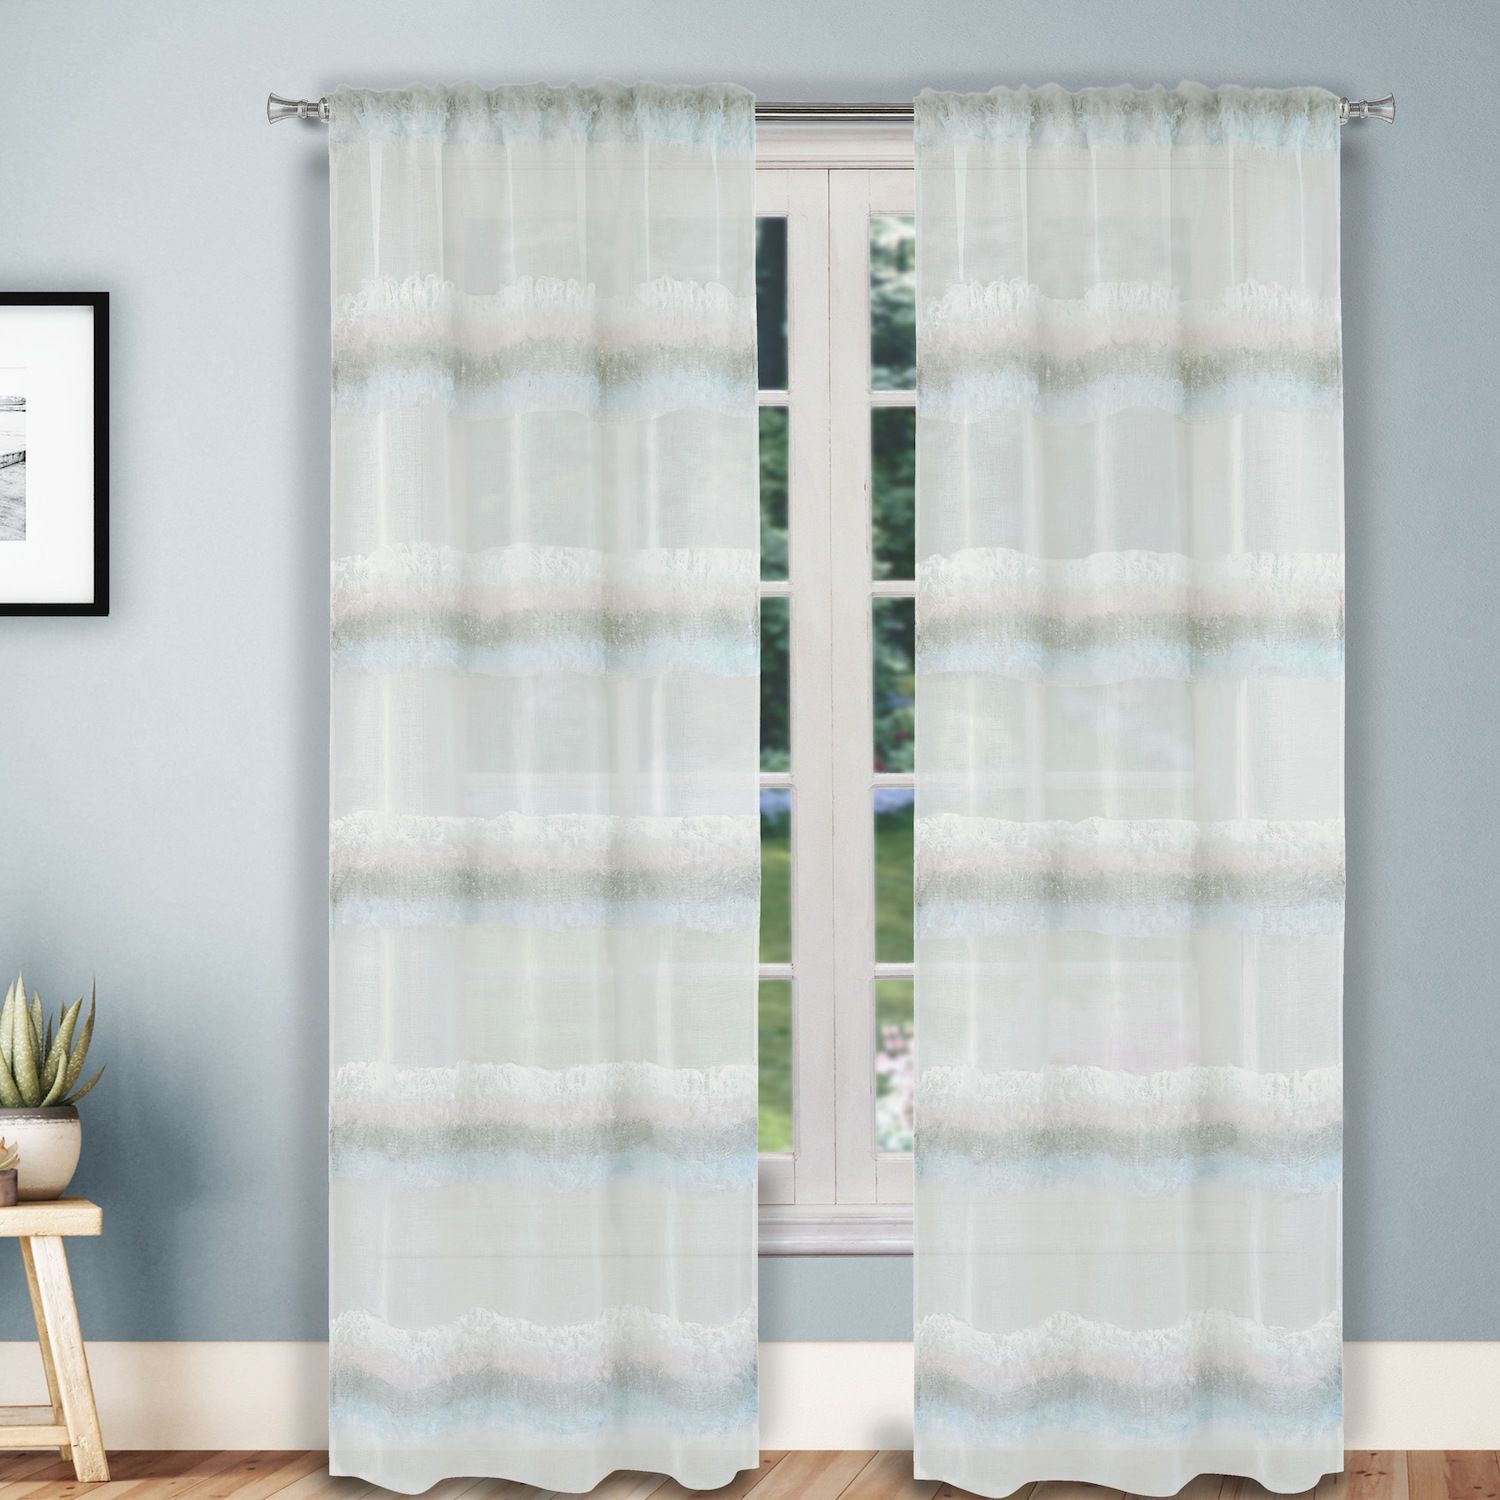 Image for Duck River Textile Camelia Striped 2-pack Window Curtain Set at Kohl's.